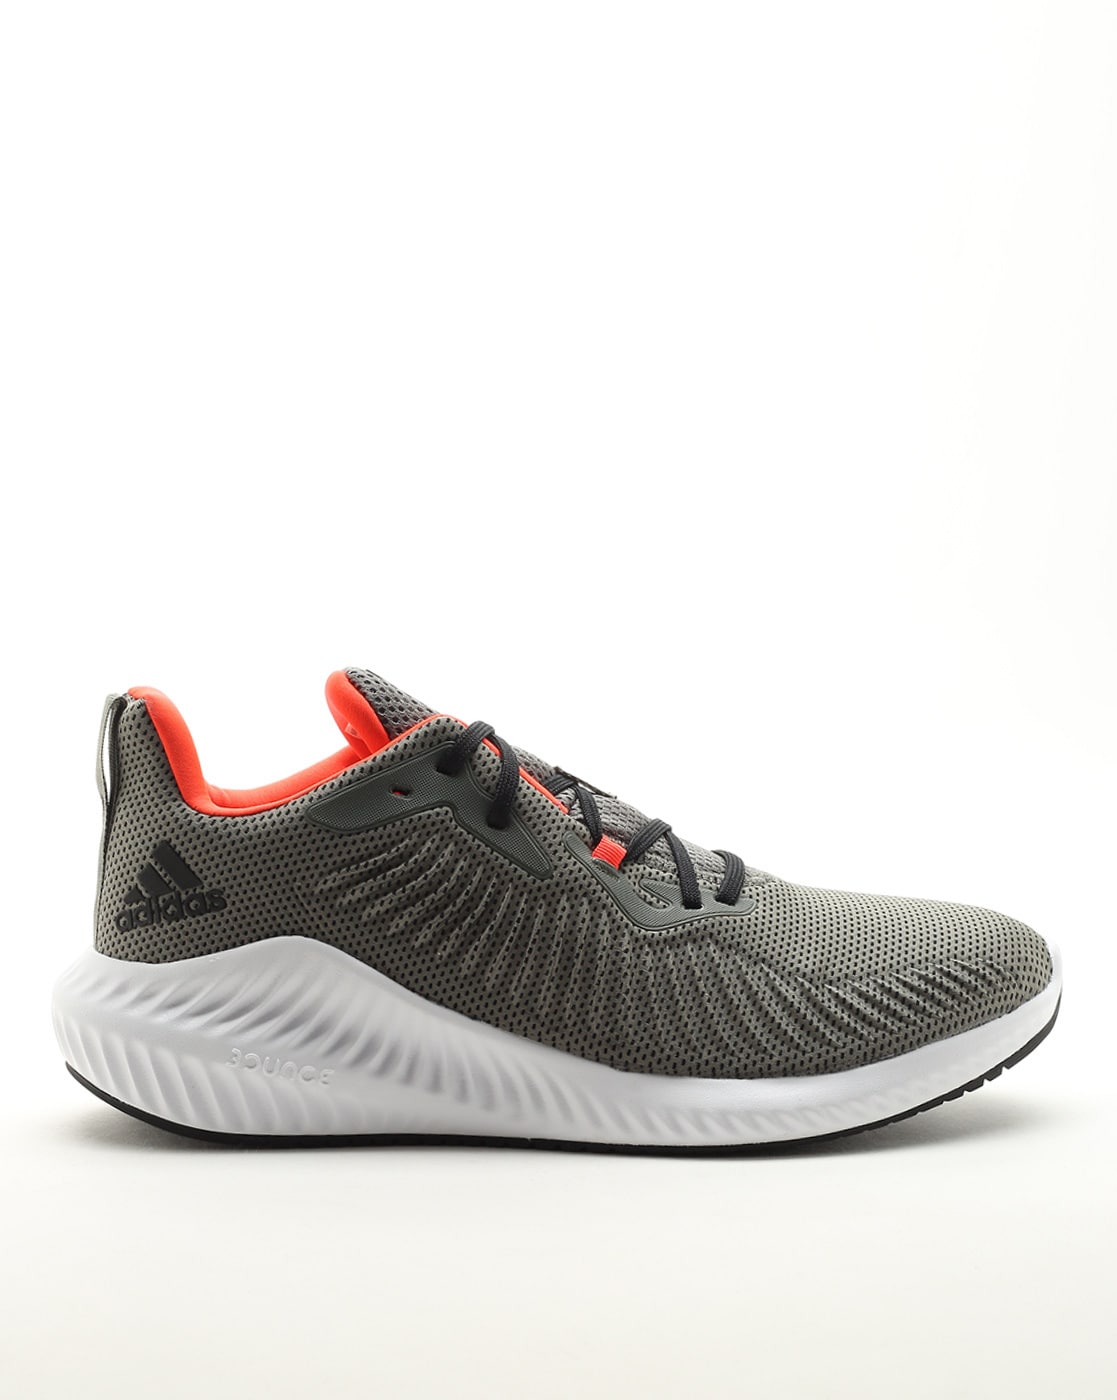 Alphabounce - Buy Alphabounce online in India